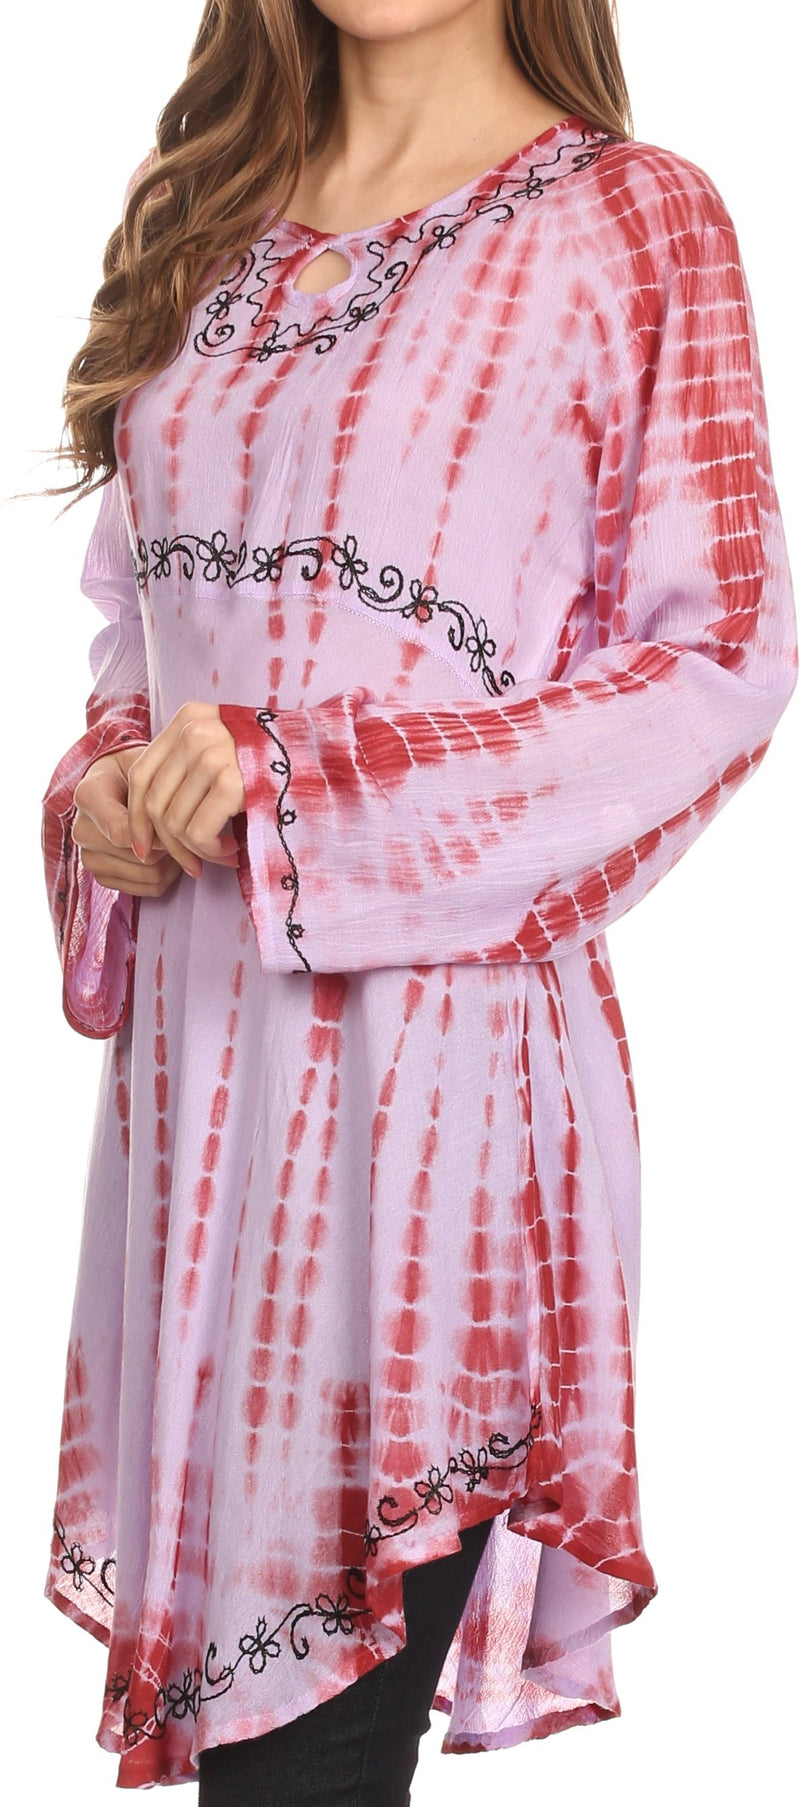 Sakkas Arissa Long Sleeved Tunic Blouse Embroidered Tie Dye Circle Dress / Cover Up